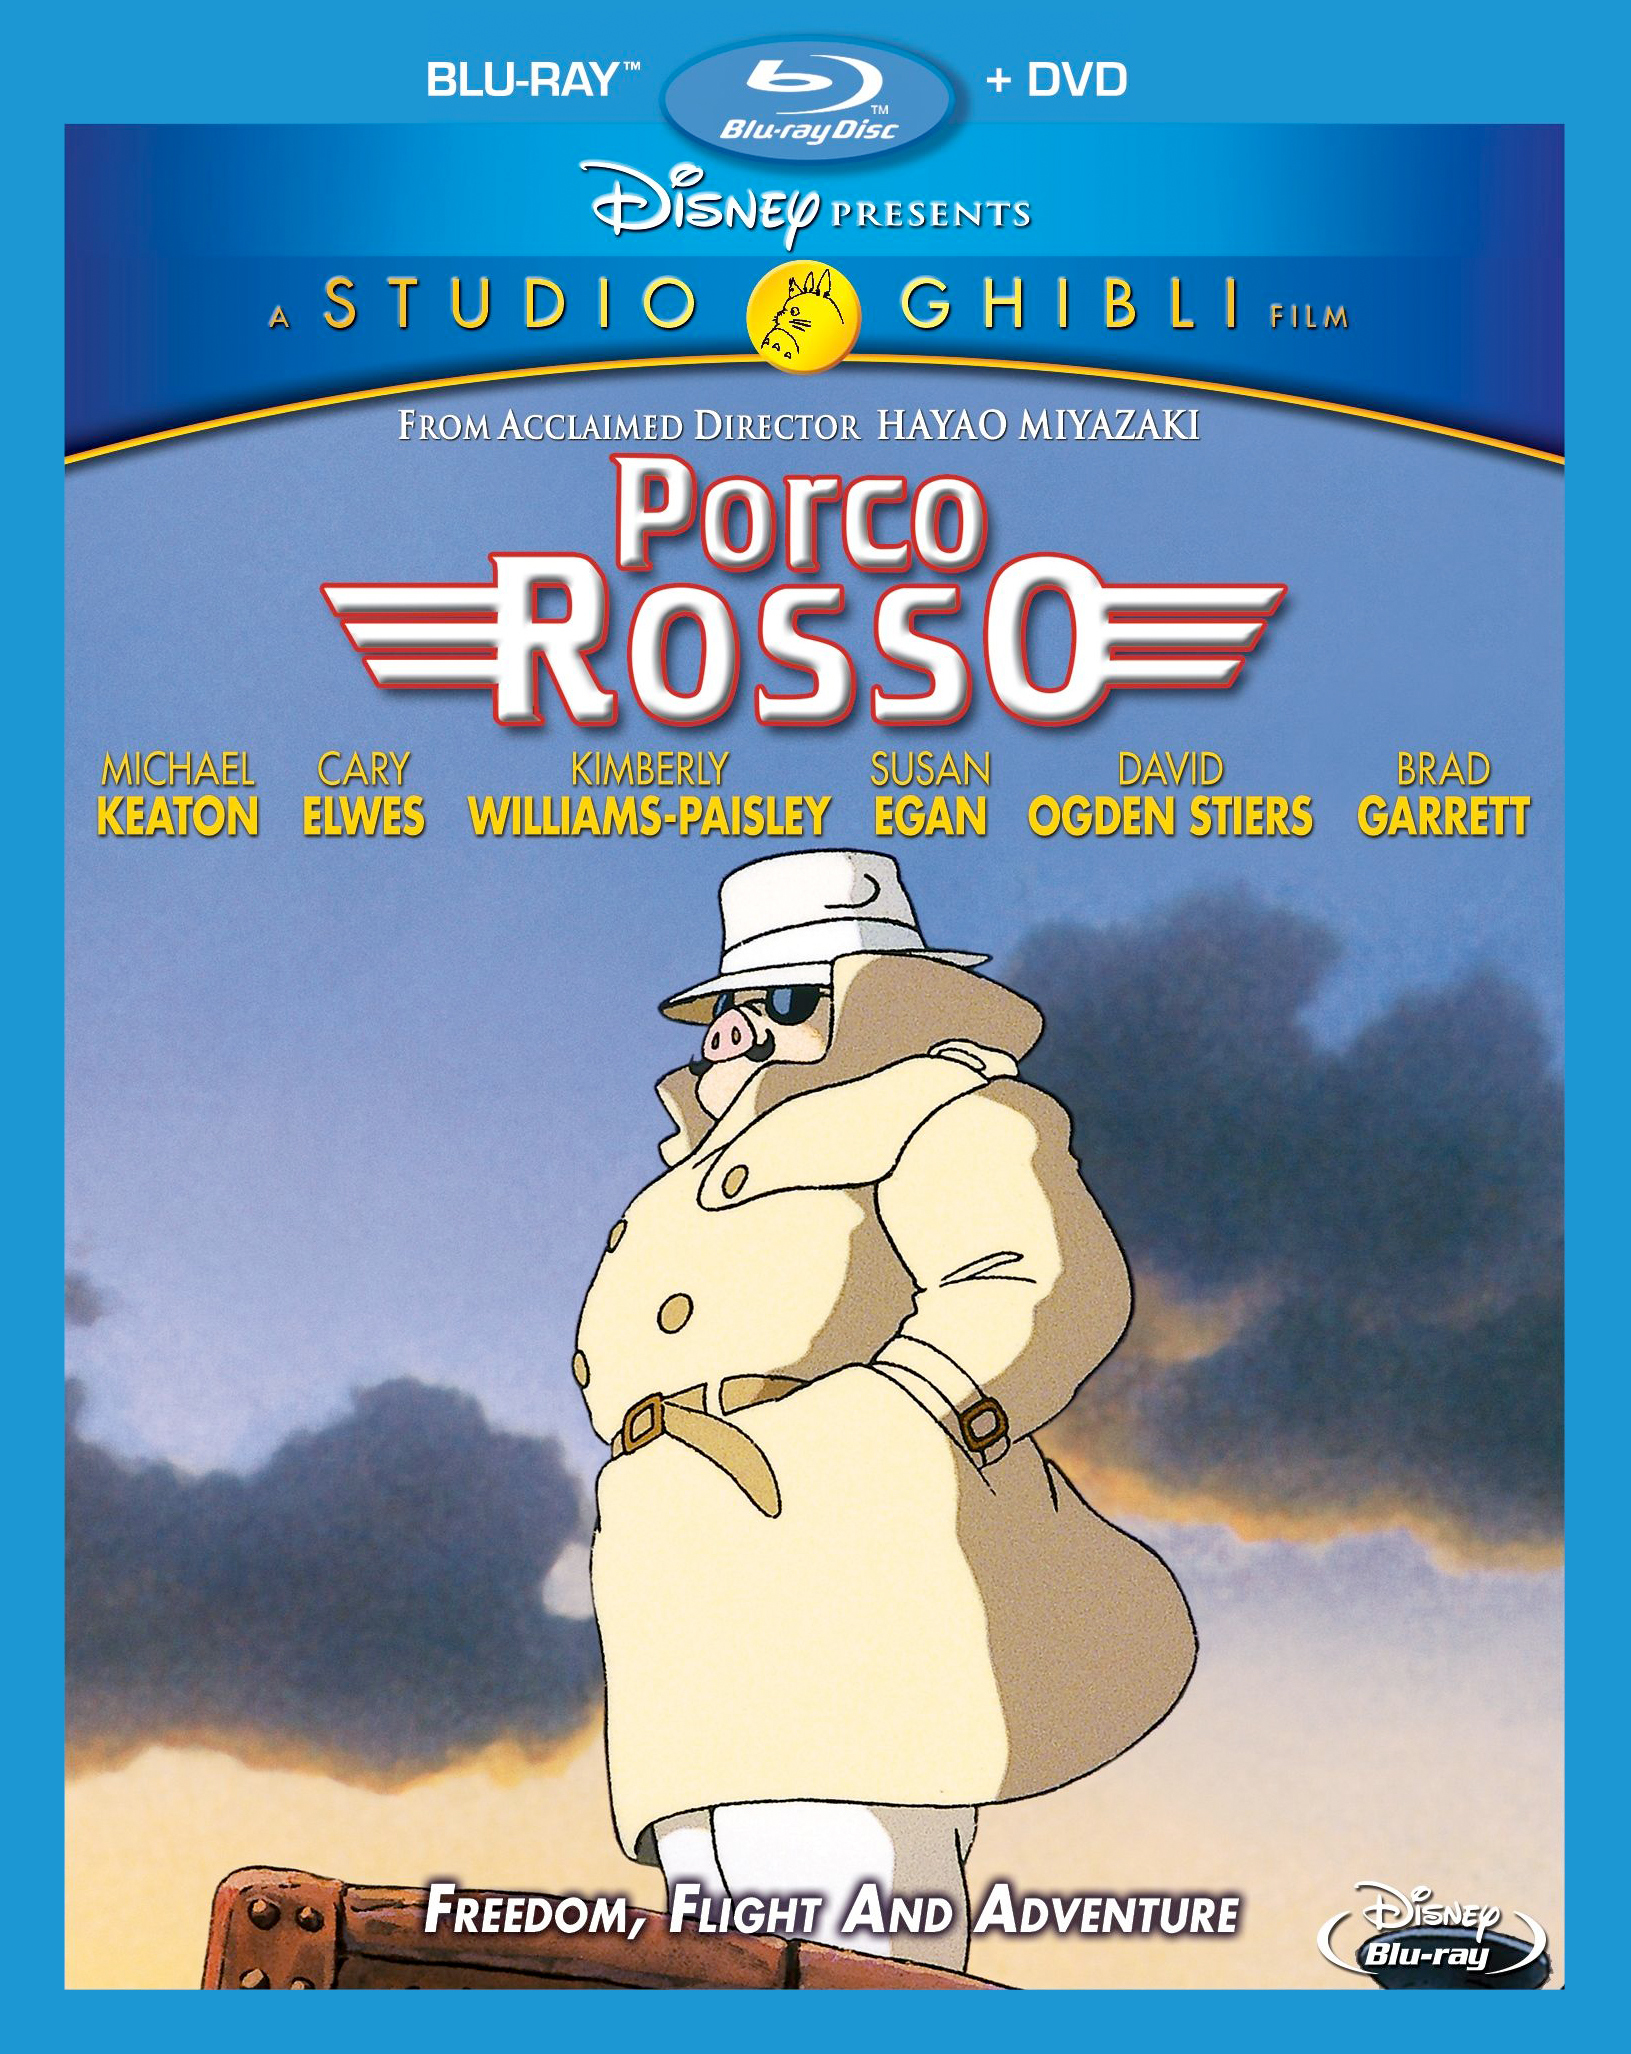 "Porco Rosso" Blu-Ray Review